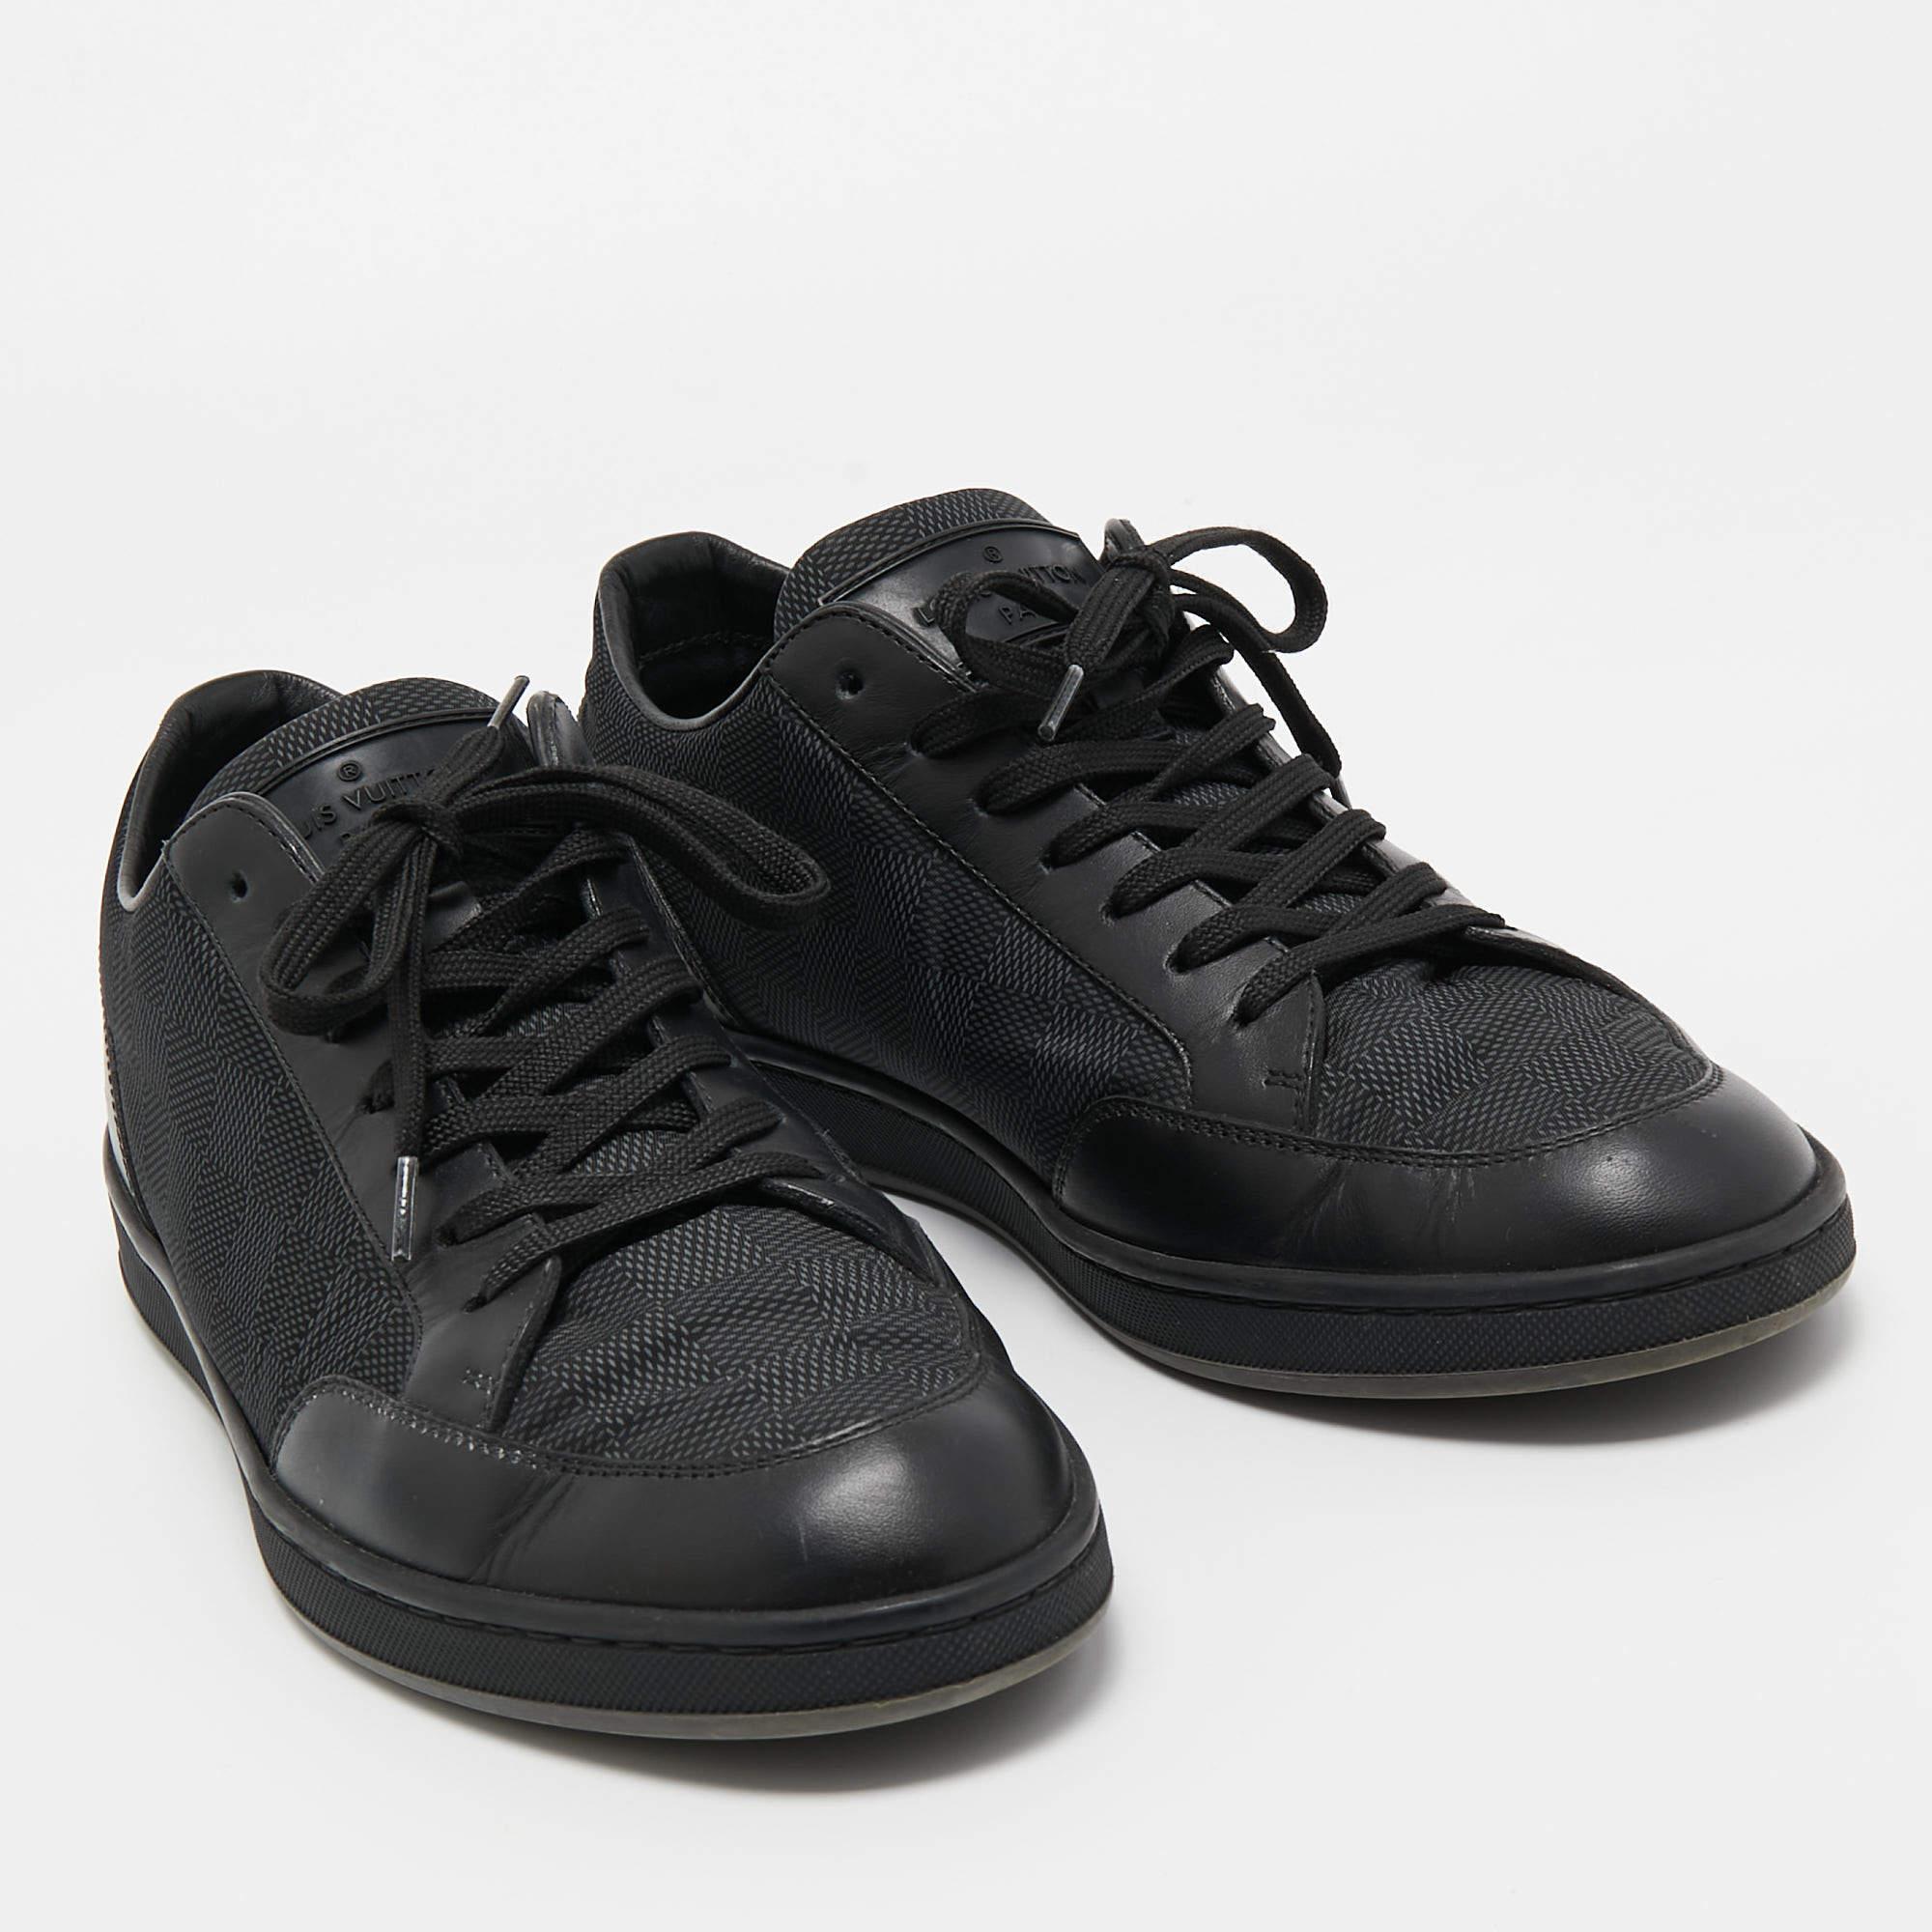 Louis Vuitton Black Leather and Nylon Low Top Sneakers Size 41 In Good Condition For Sale In Dubai, Al Qouz 2